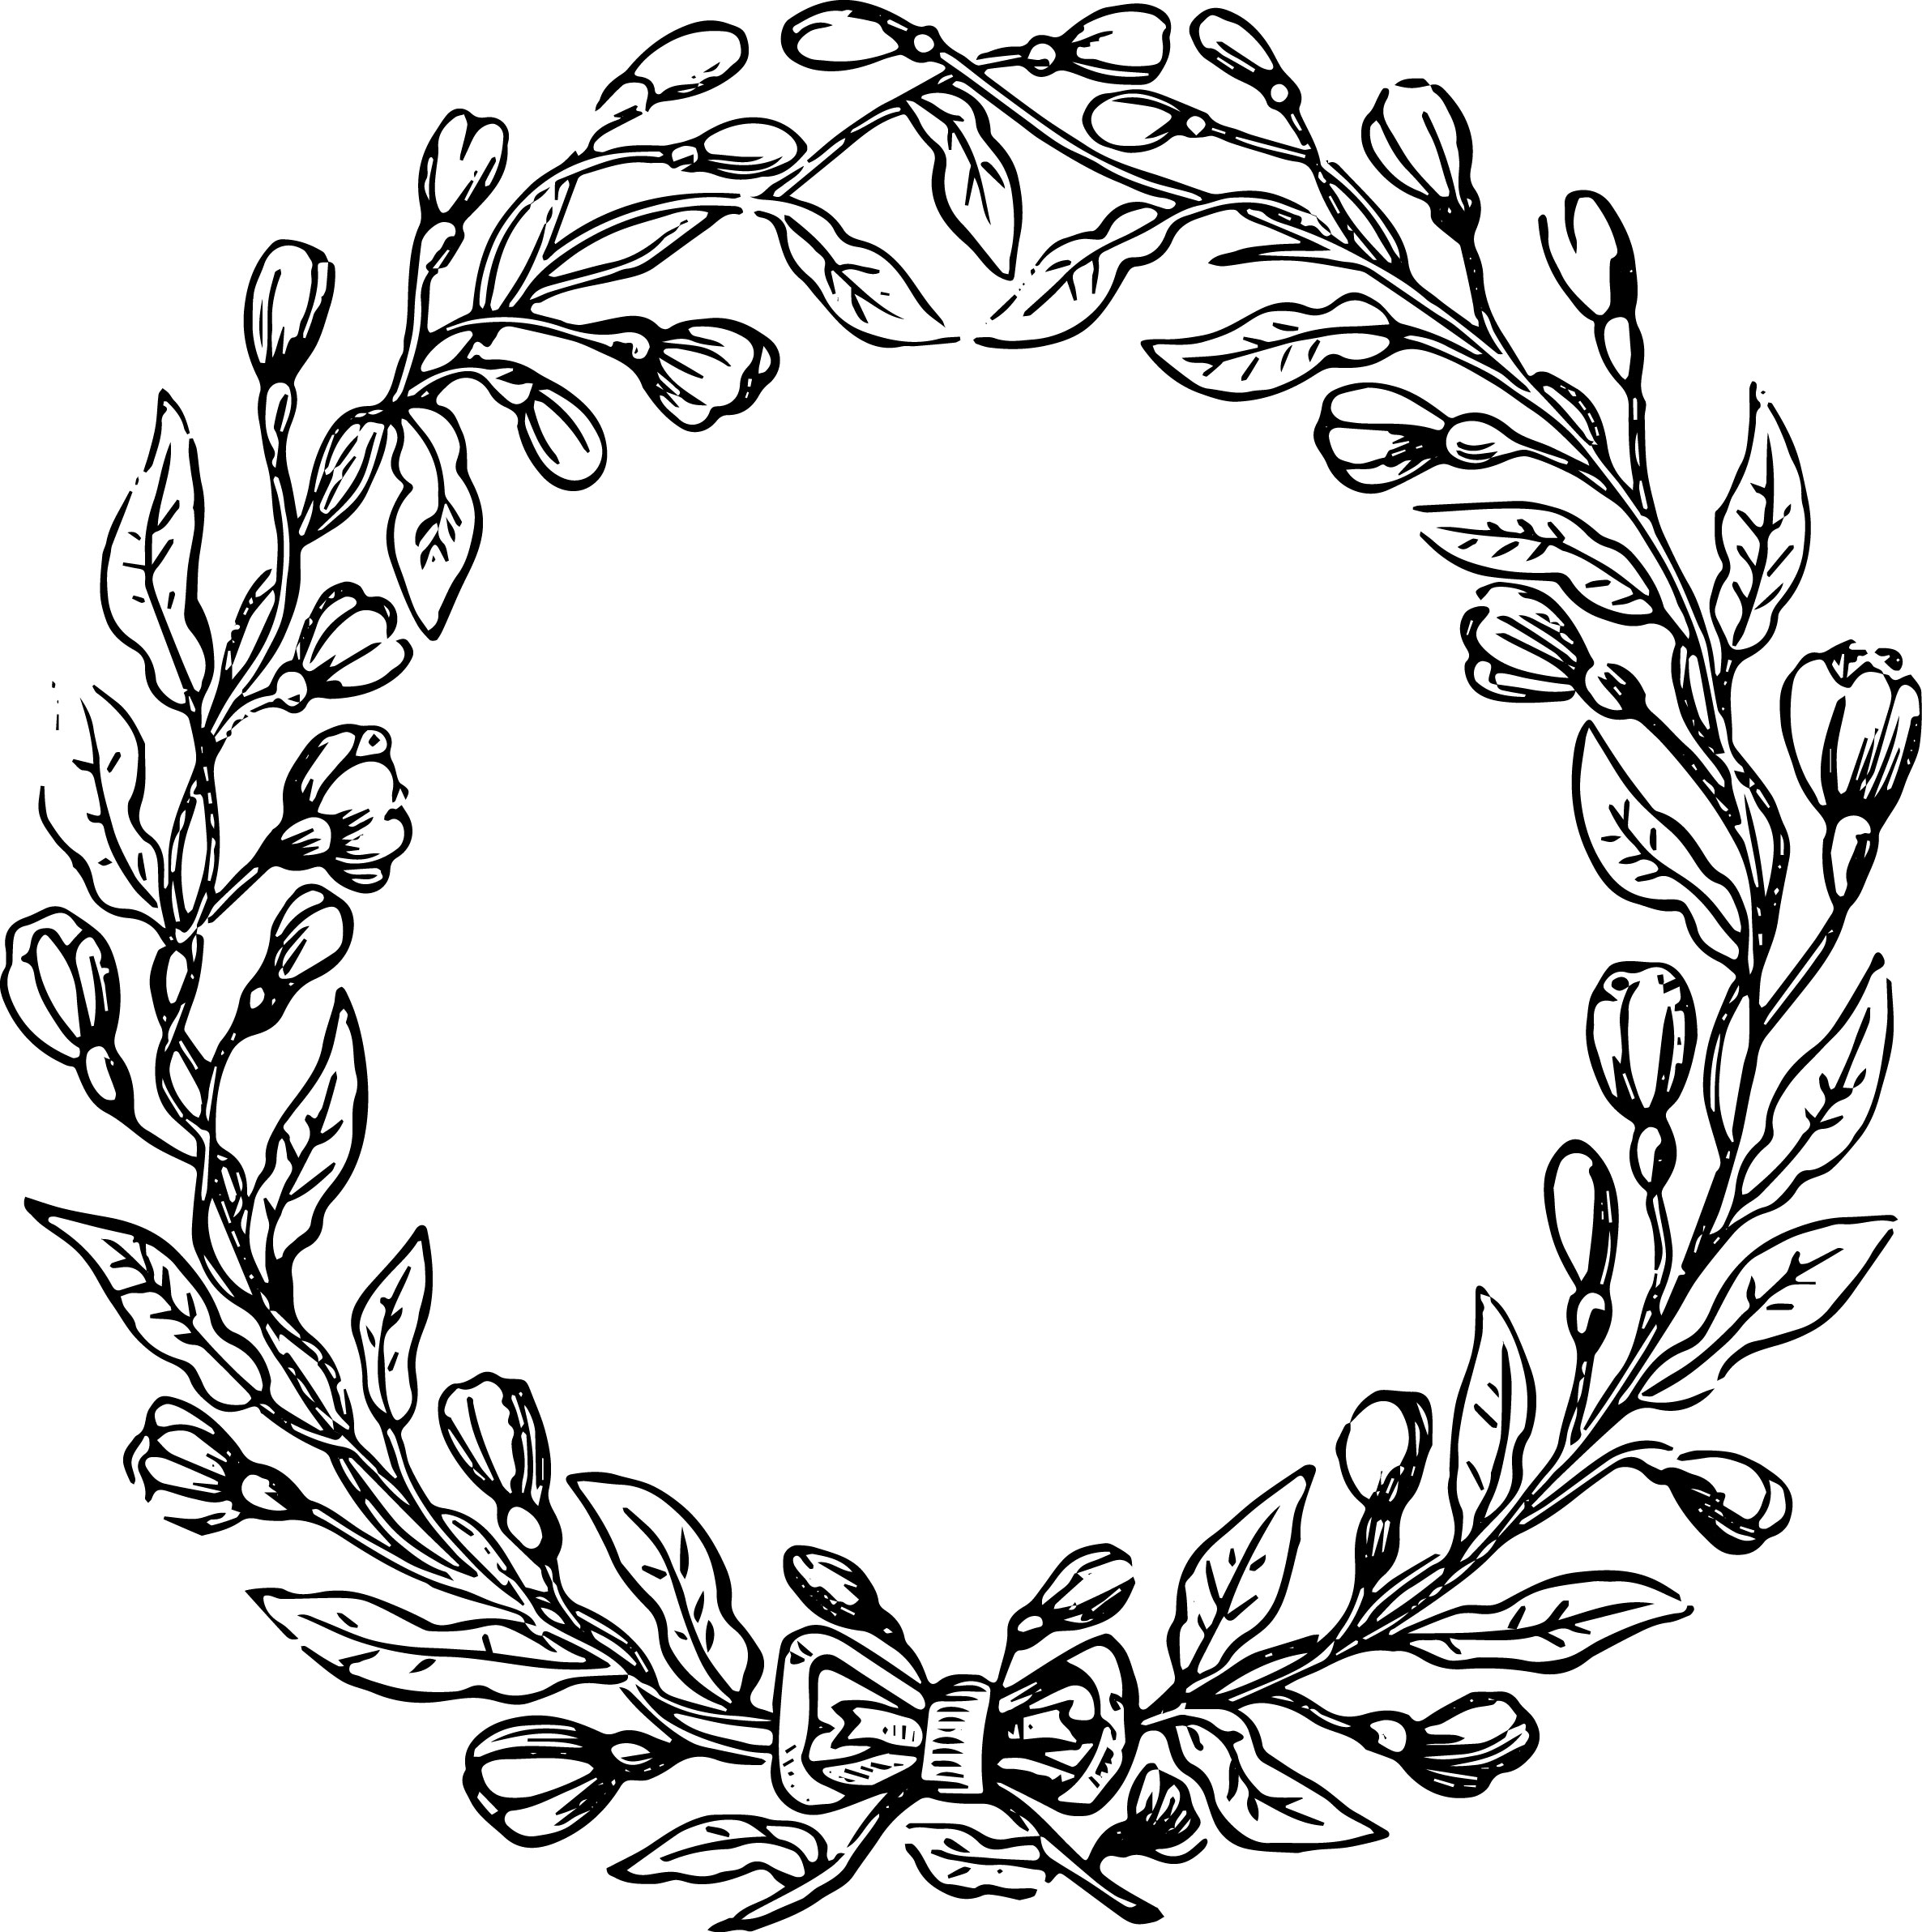 Free Vector File and Clip Art Image - Vintage Floral Wreath | Oh ...